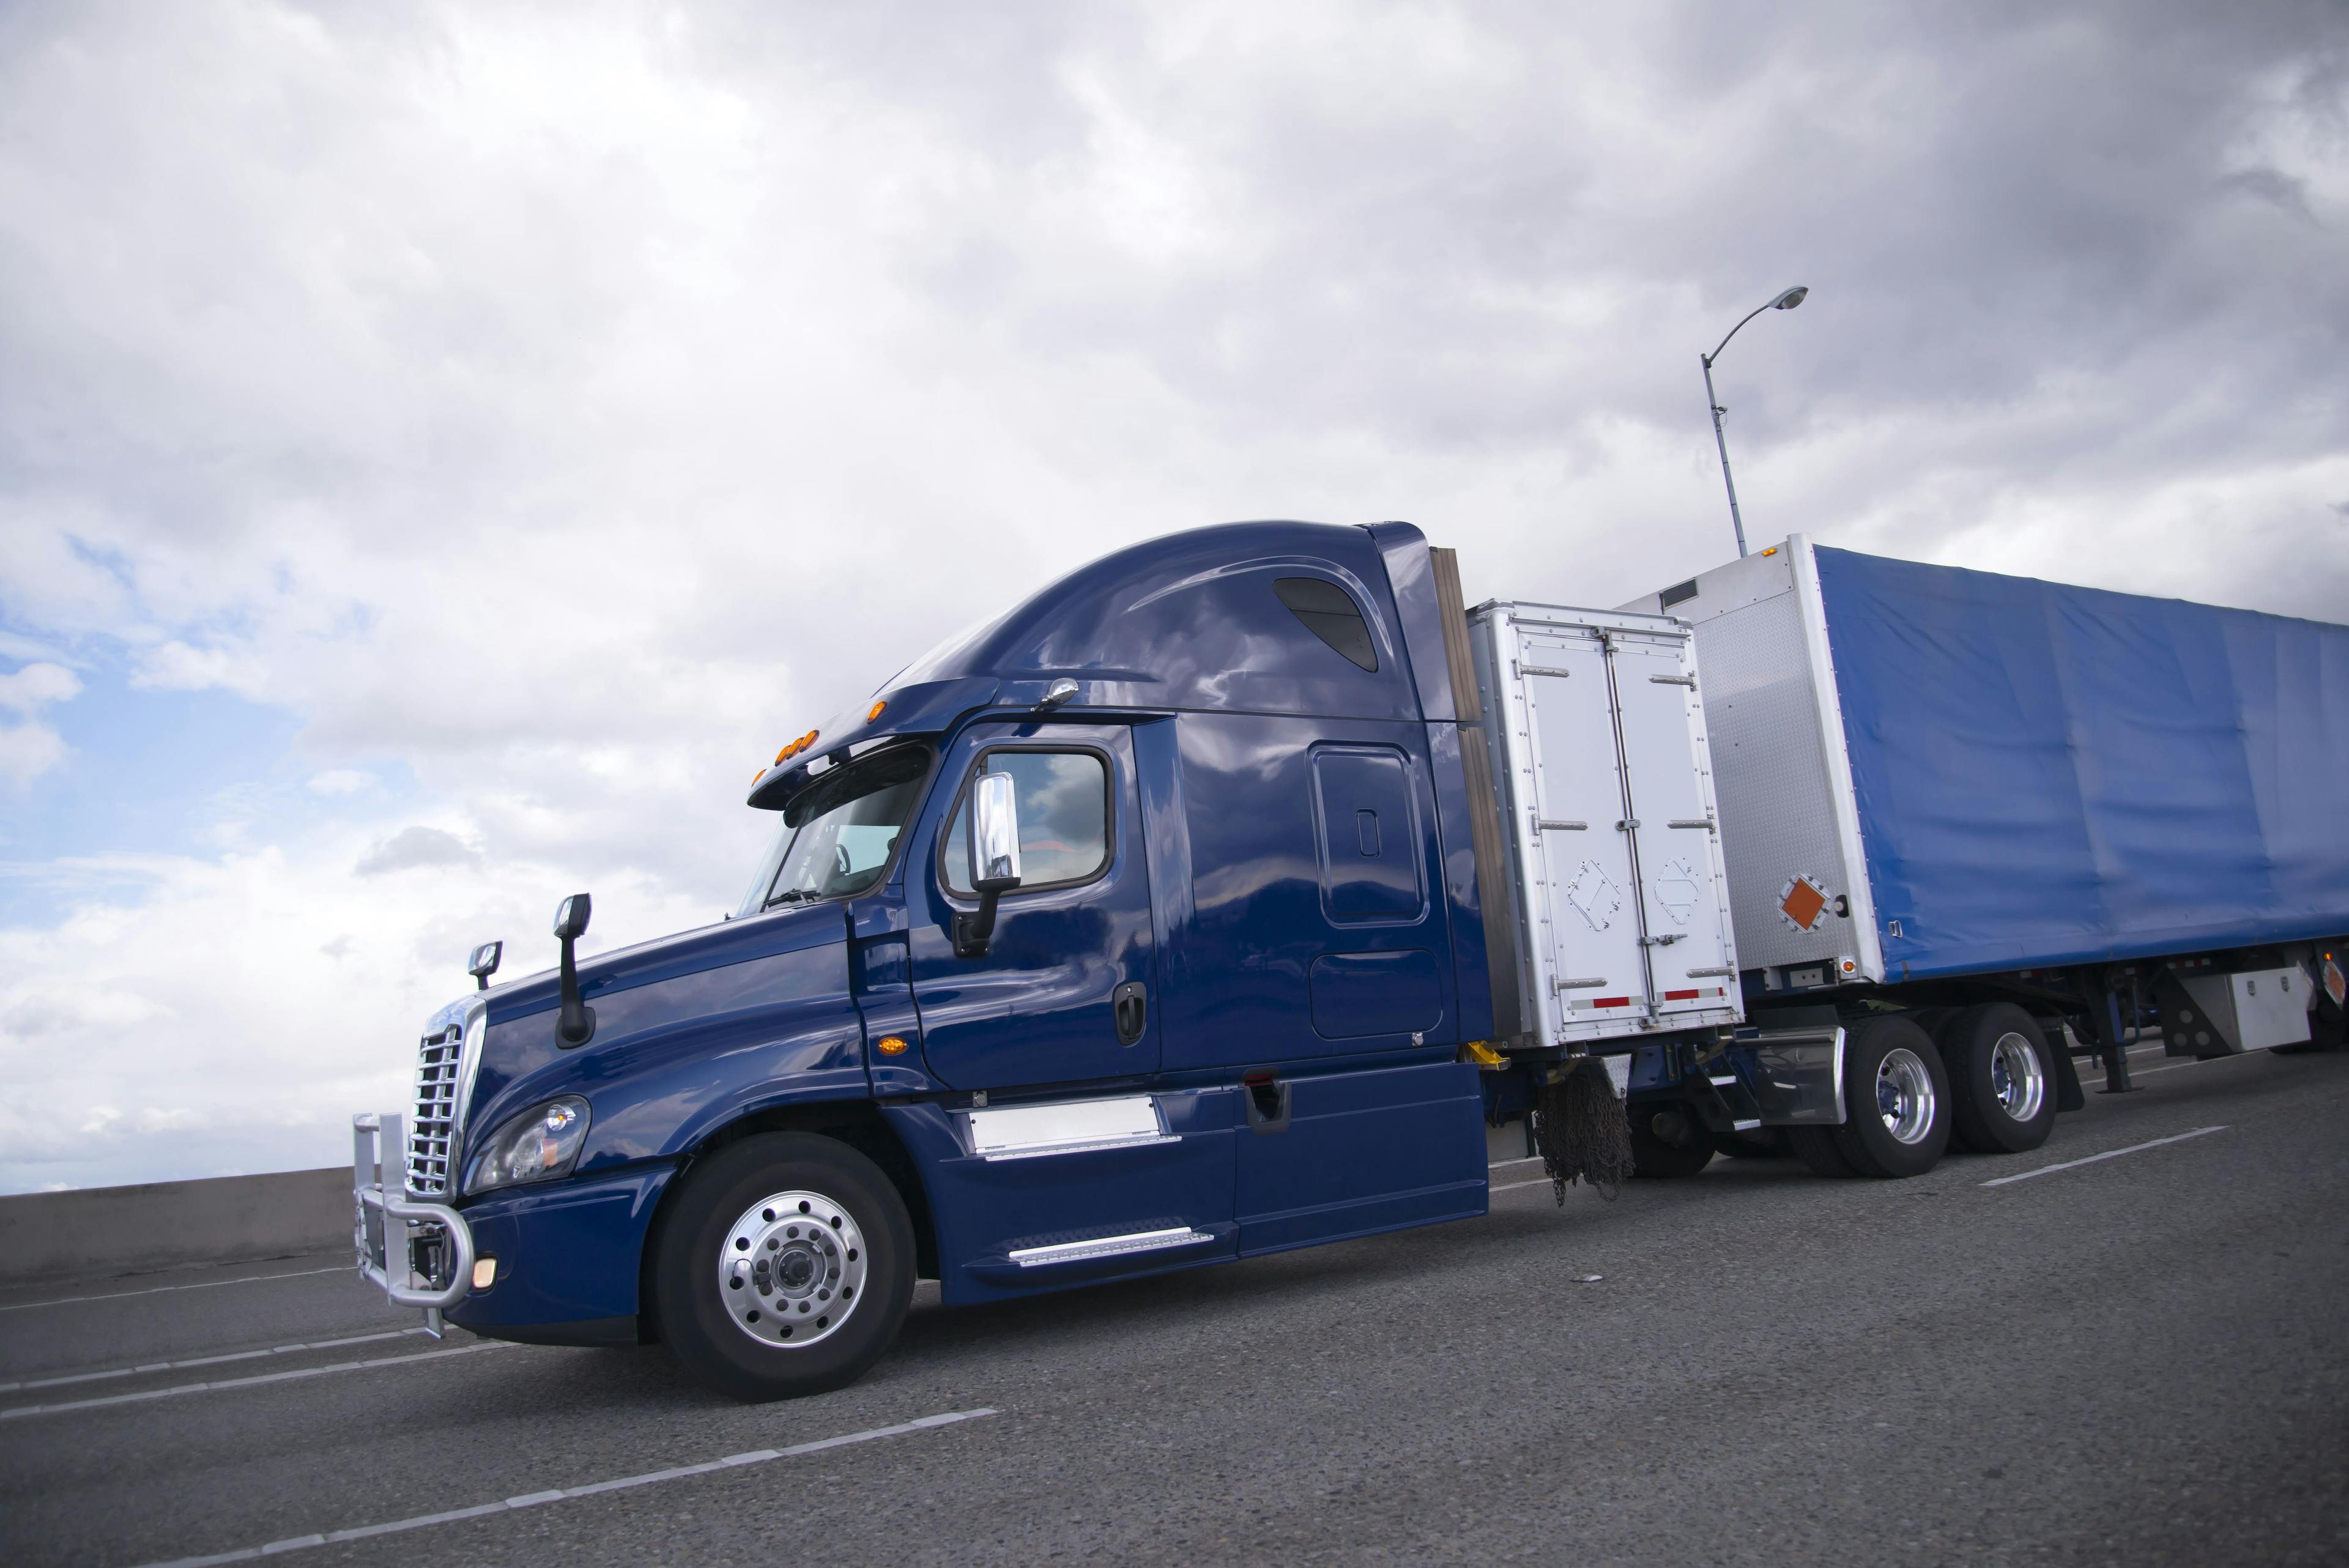 How Access To Transportation Data Improves The Shipper-Carrier Relationship